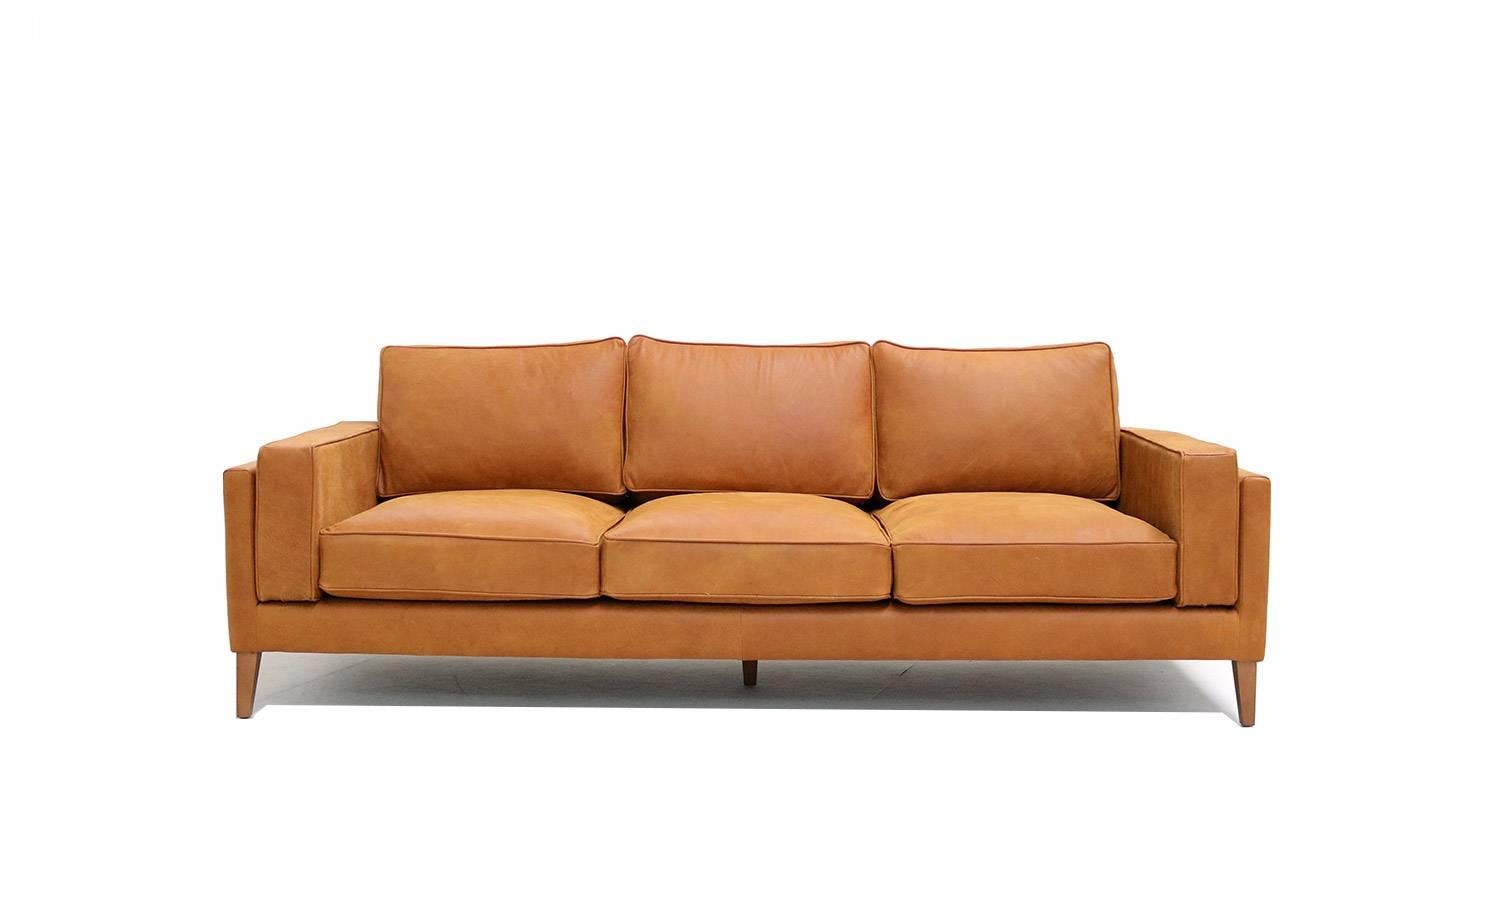 Coyoacan sofa captures the essence of bohemian style. The sofa is inspired by the vibrant neighborhood of Coyoacan in Mexico City, which has been home to many Mexican artists over the years. A neighborhood with a rich history and cultural